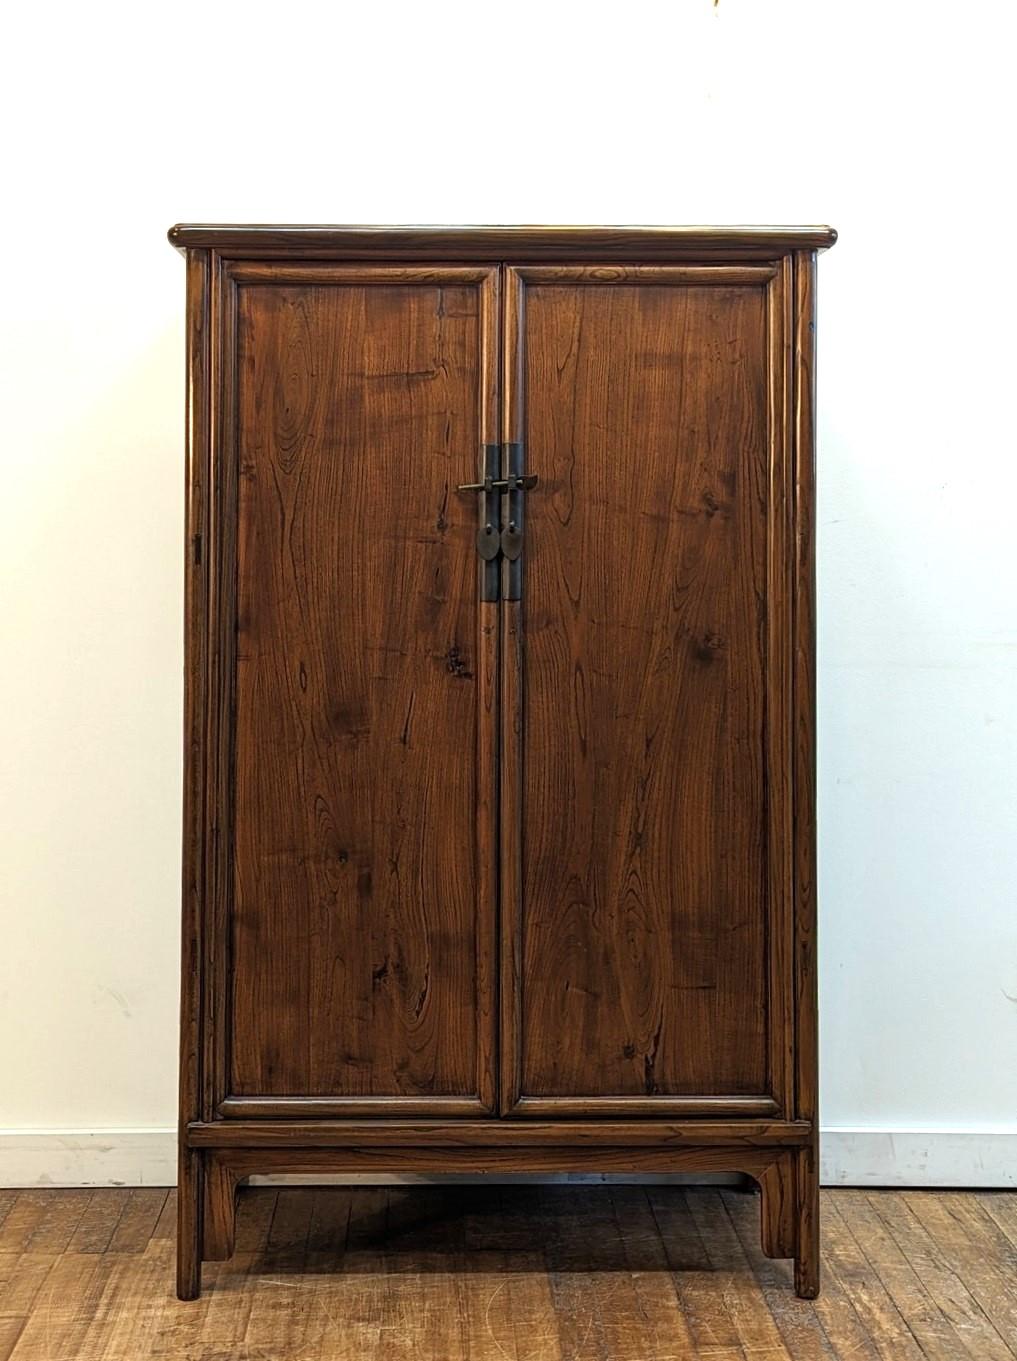 Antique Round Corner Tapered Cabinet.  Solid elm wood round corner cabinet with tapering silhouette in a style of the Ming Dynasty.   Traditional tenon and mortise joinery of a past century having a modernist and minimal style today.  Wonderfully